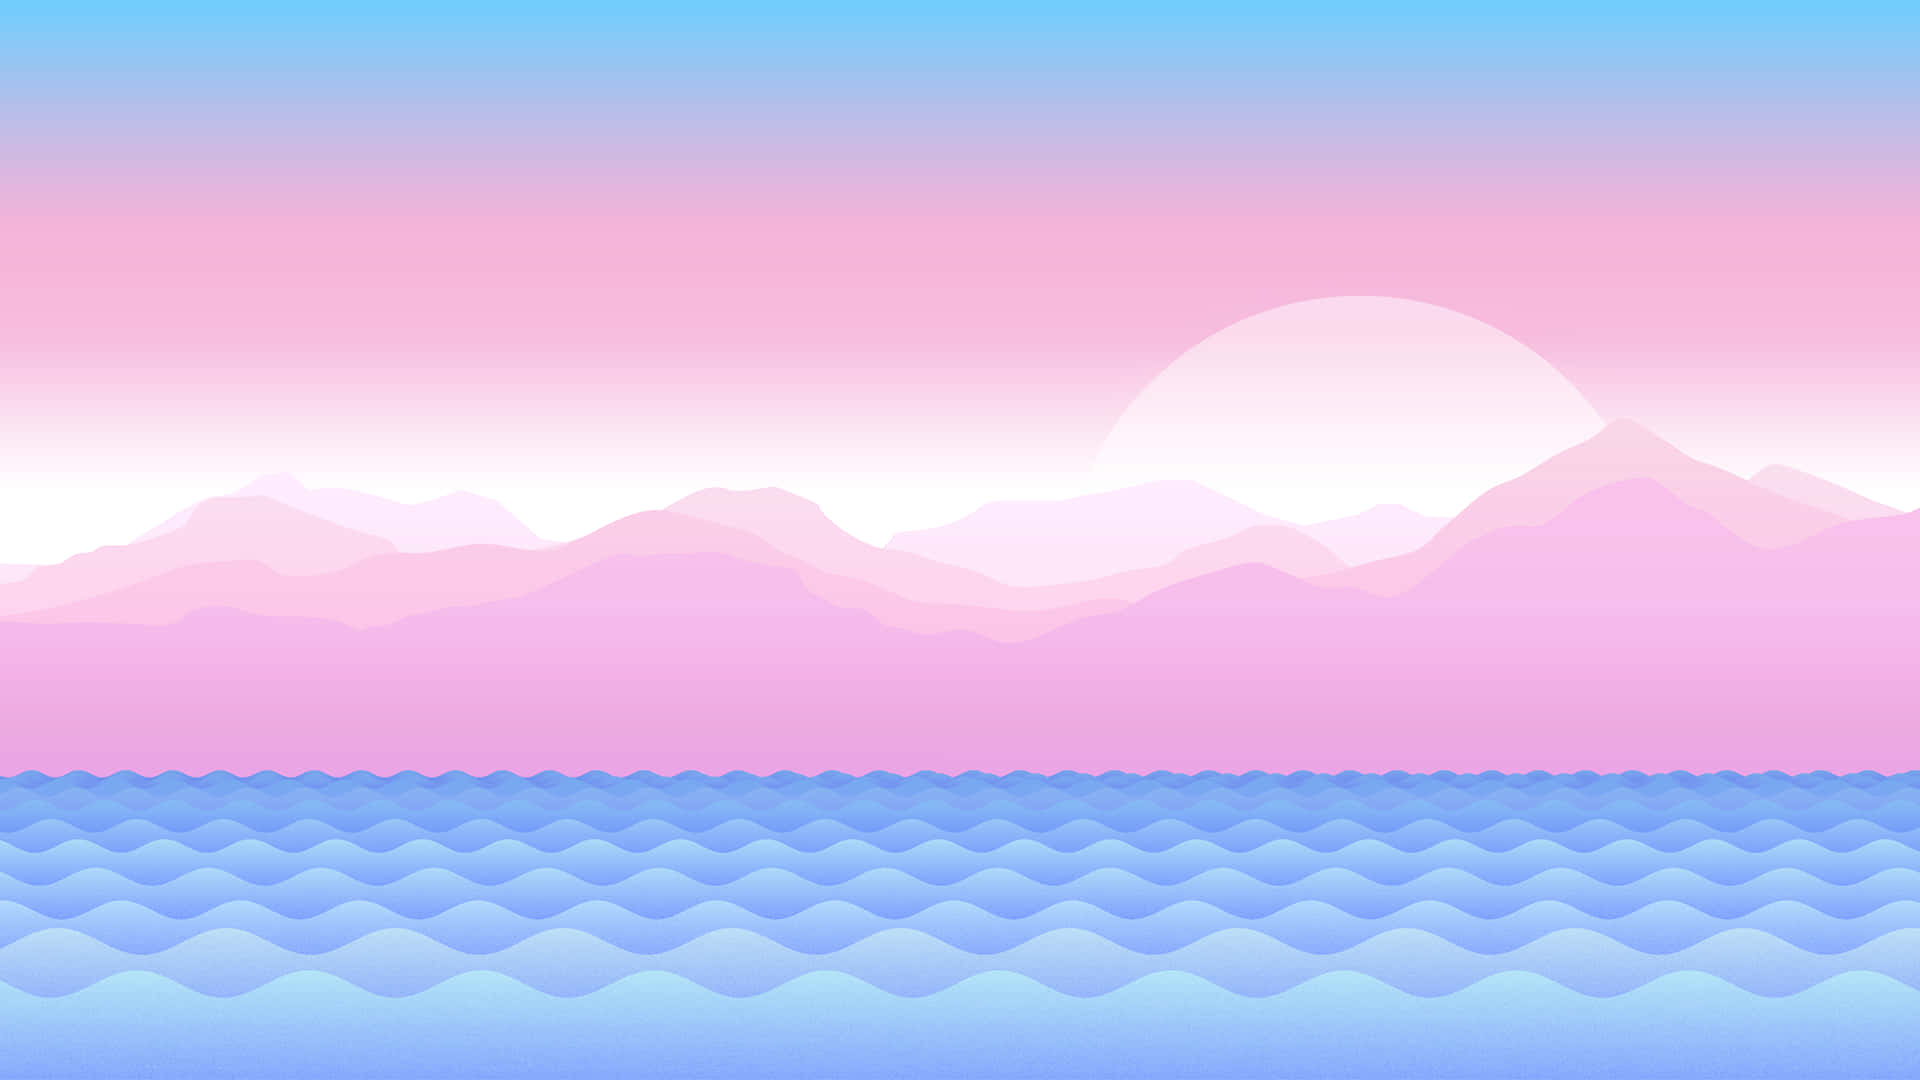 A Pink And Blue Ocean With Mountains And Waves Wallpaper